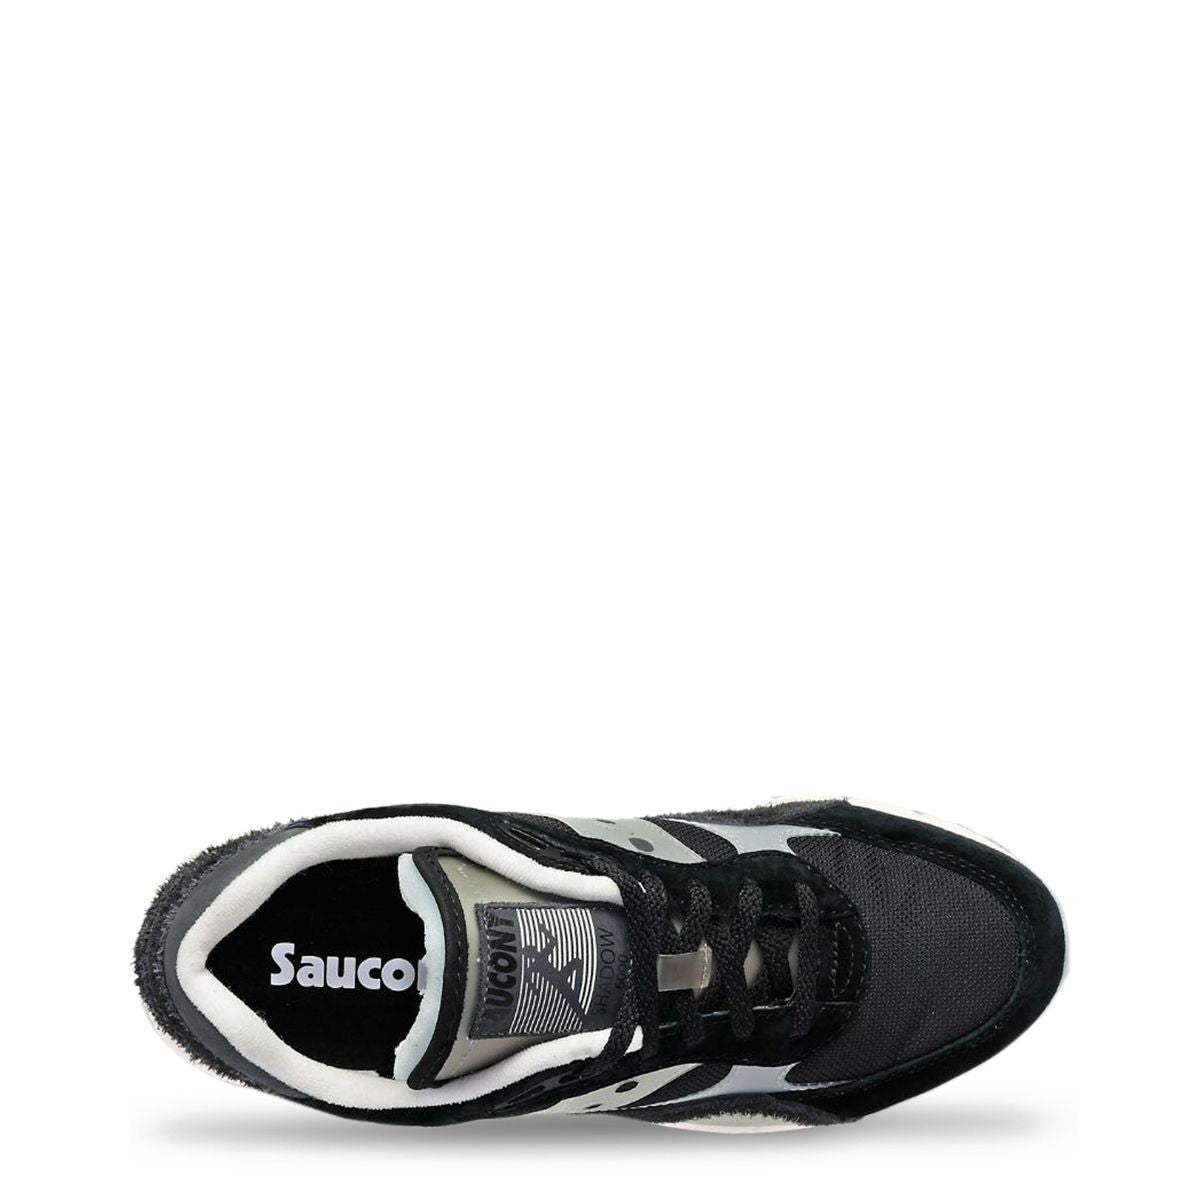 Saucony Sneakers For Unisex SHADOW-S70715